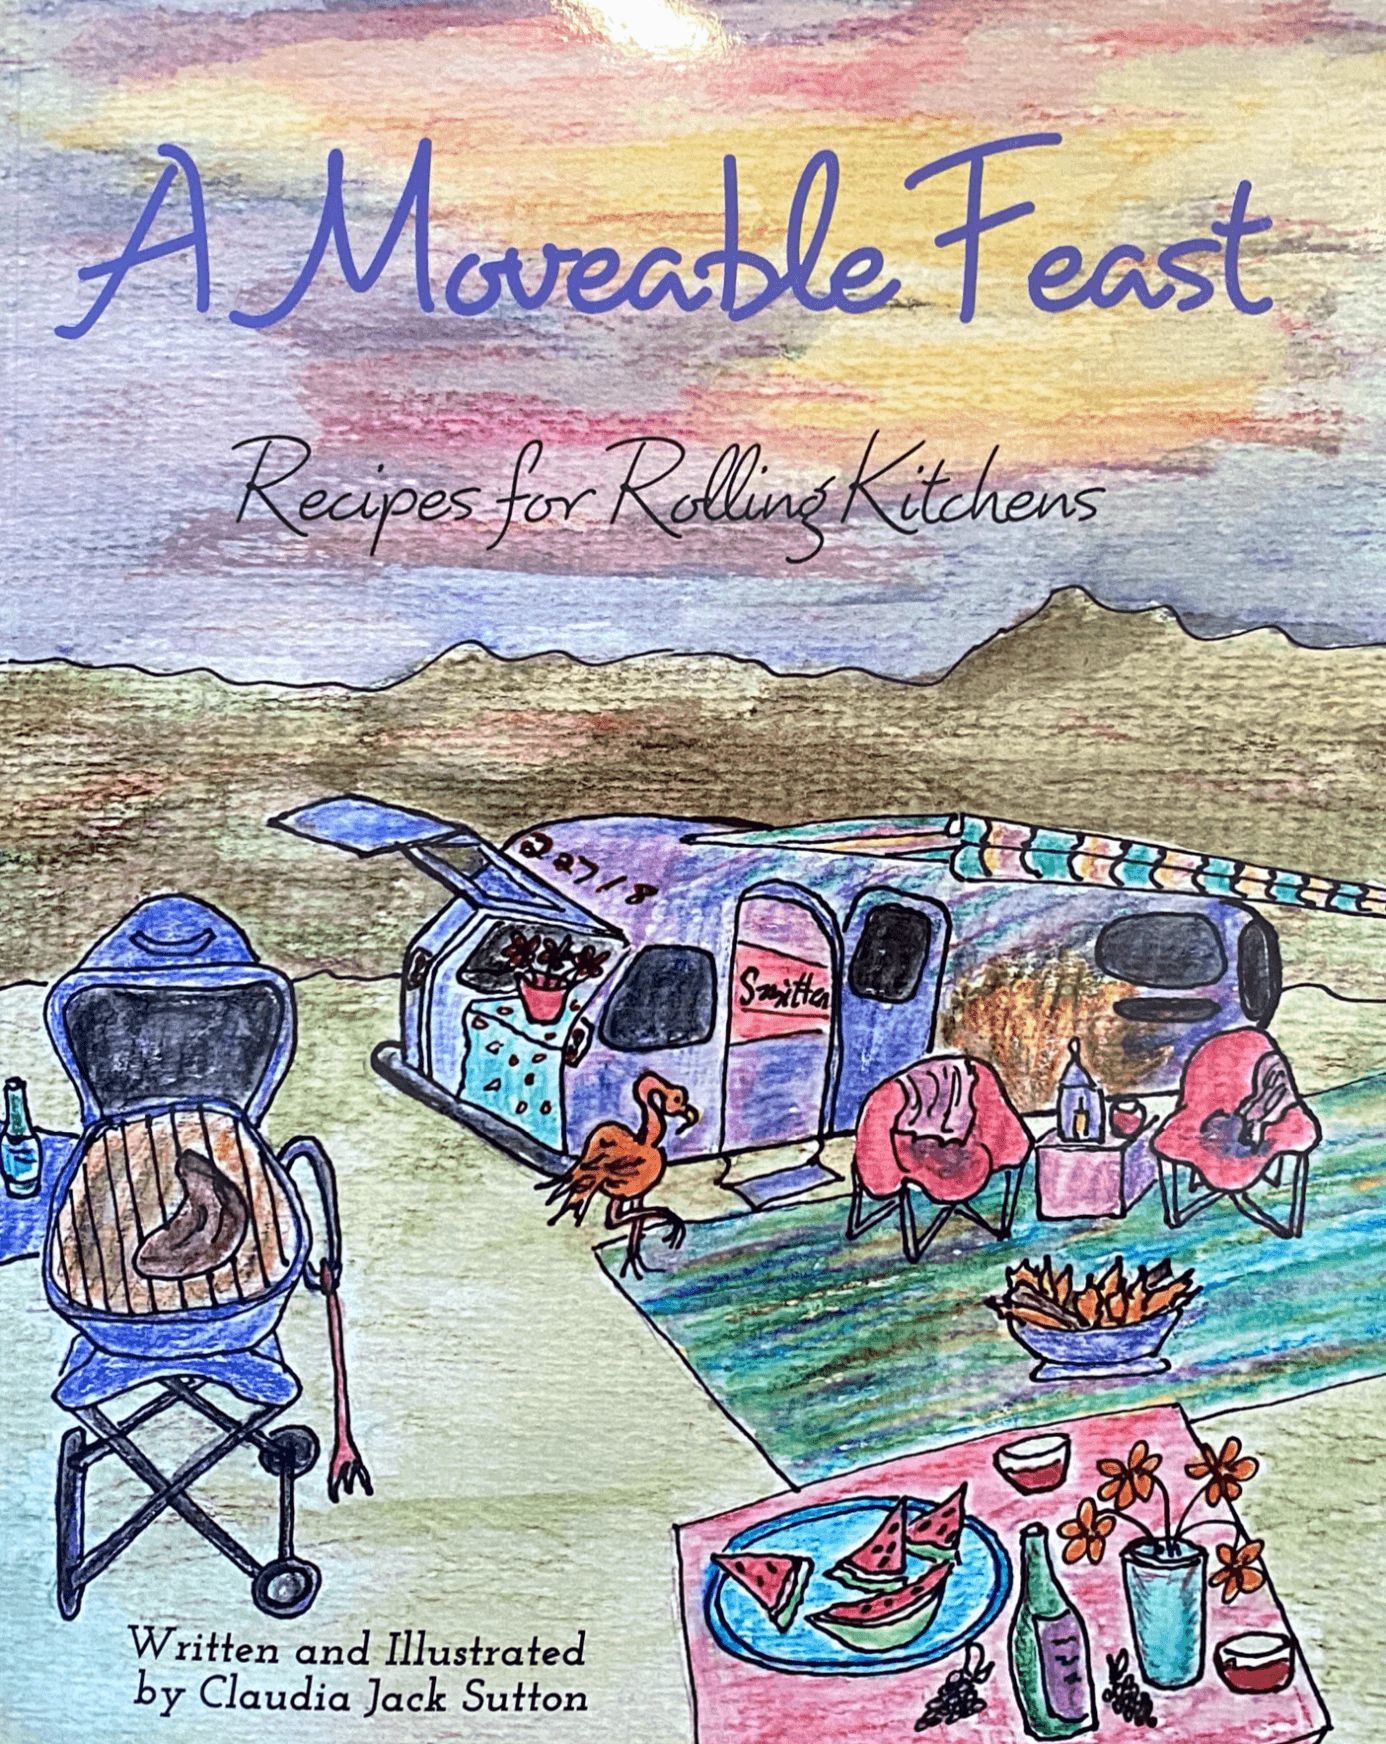 Cooking Tips for the RV Traveler - - A moveable Feast